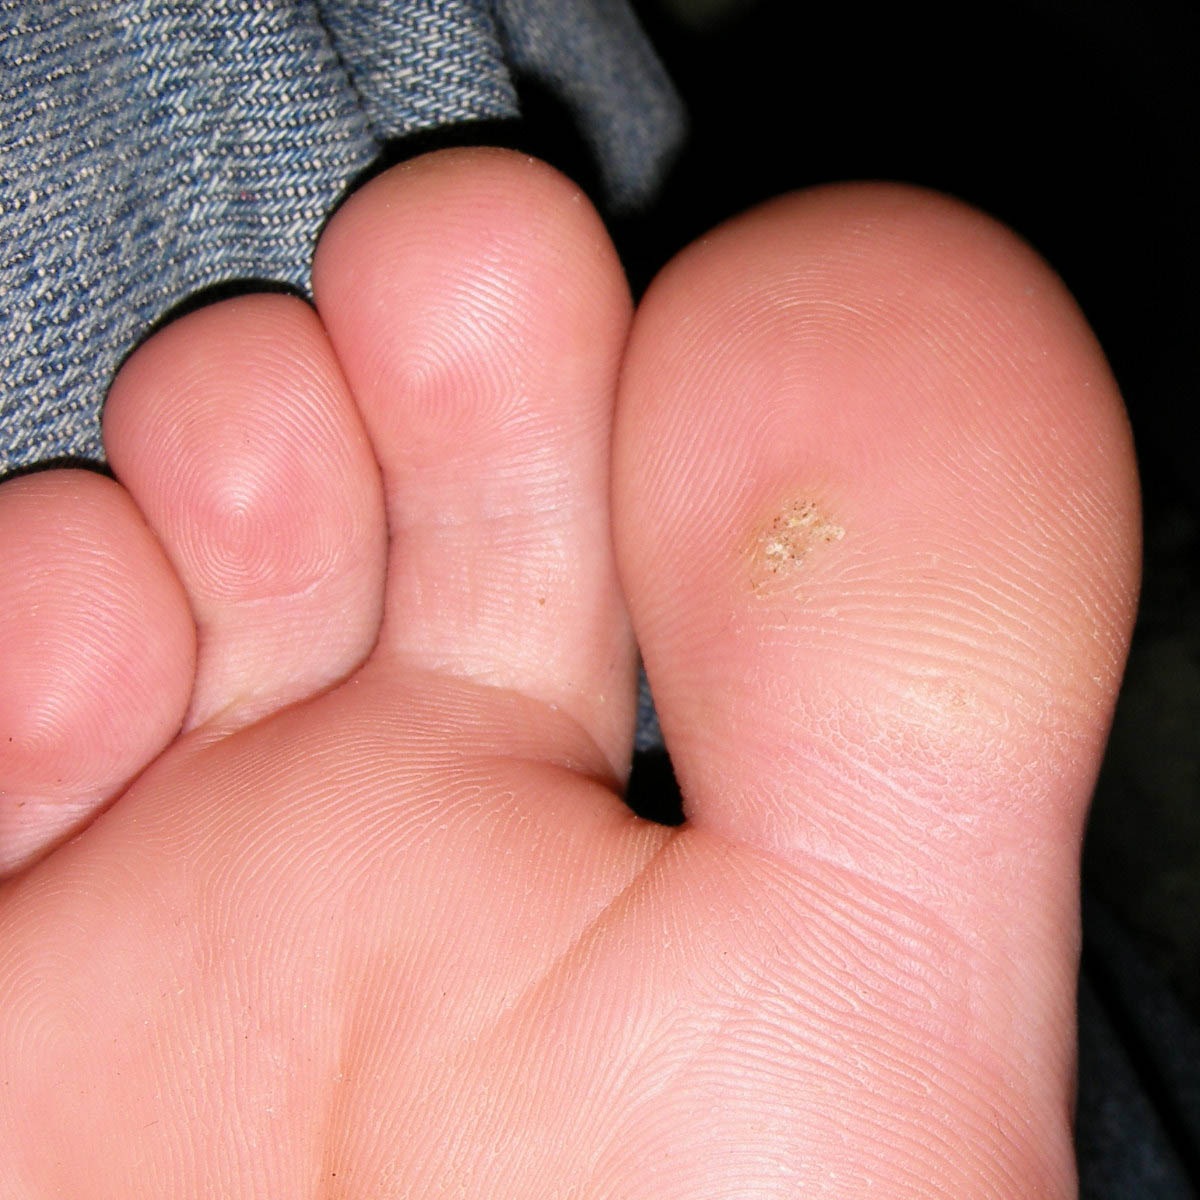 wart on the sole of a foot